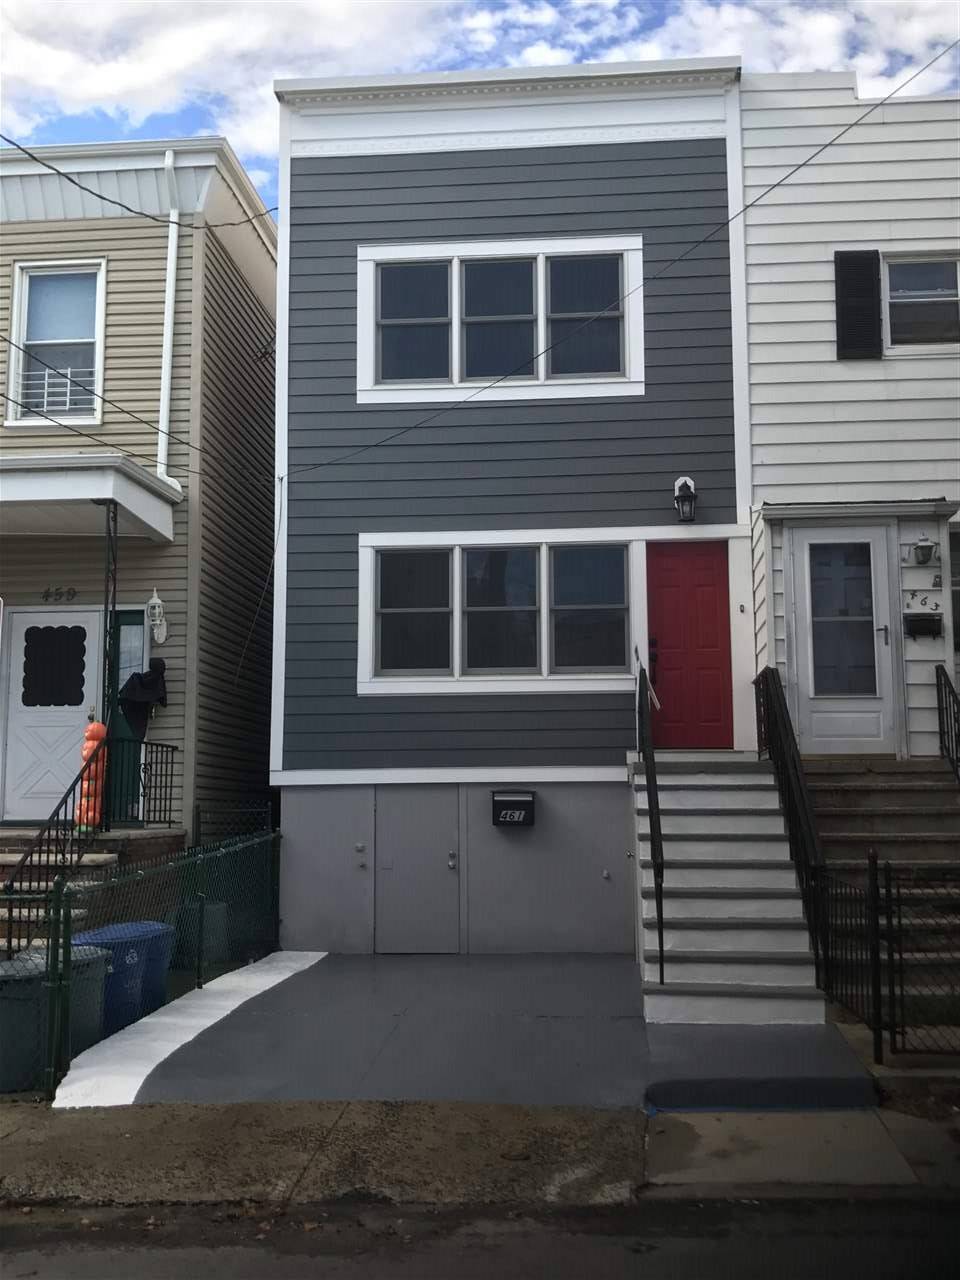 Townhouse Style - 3 BR Condo New Jersey